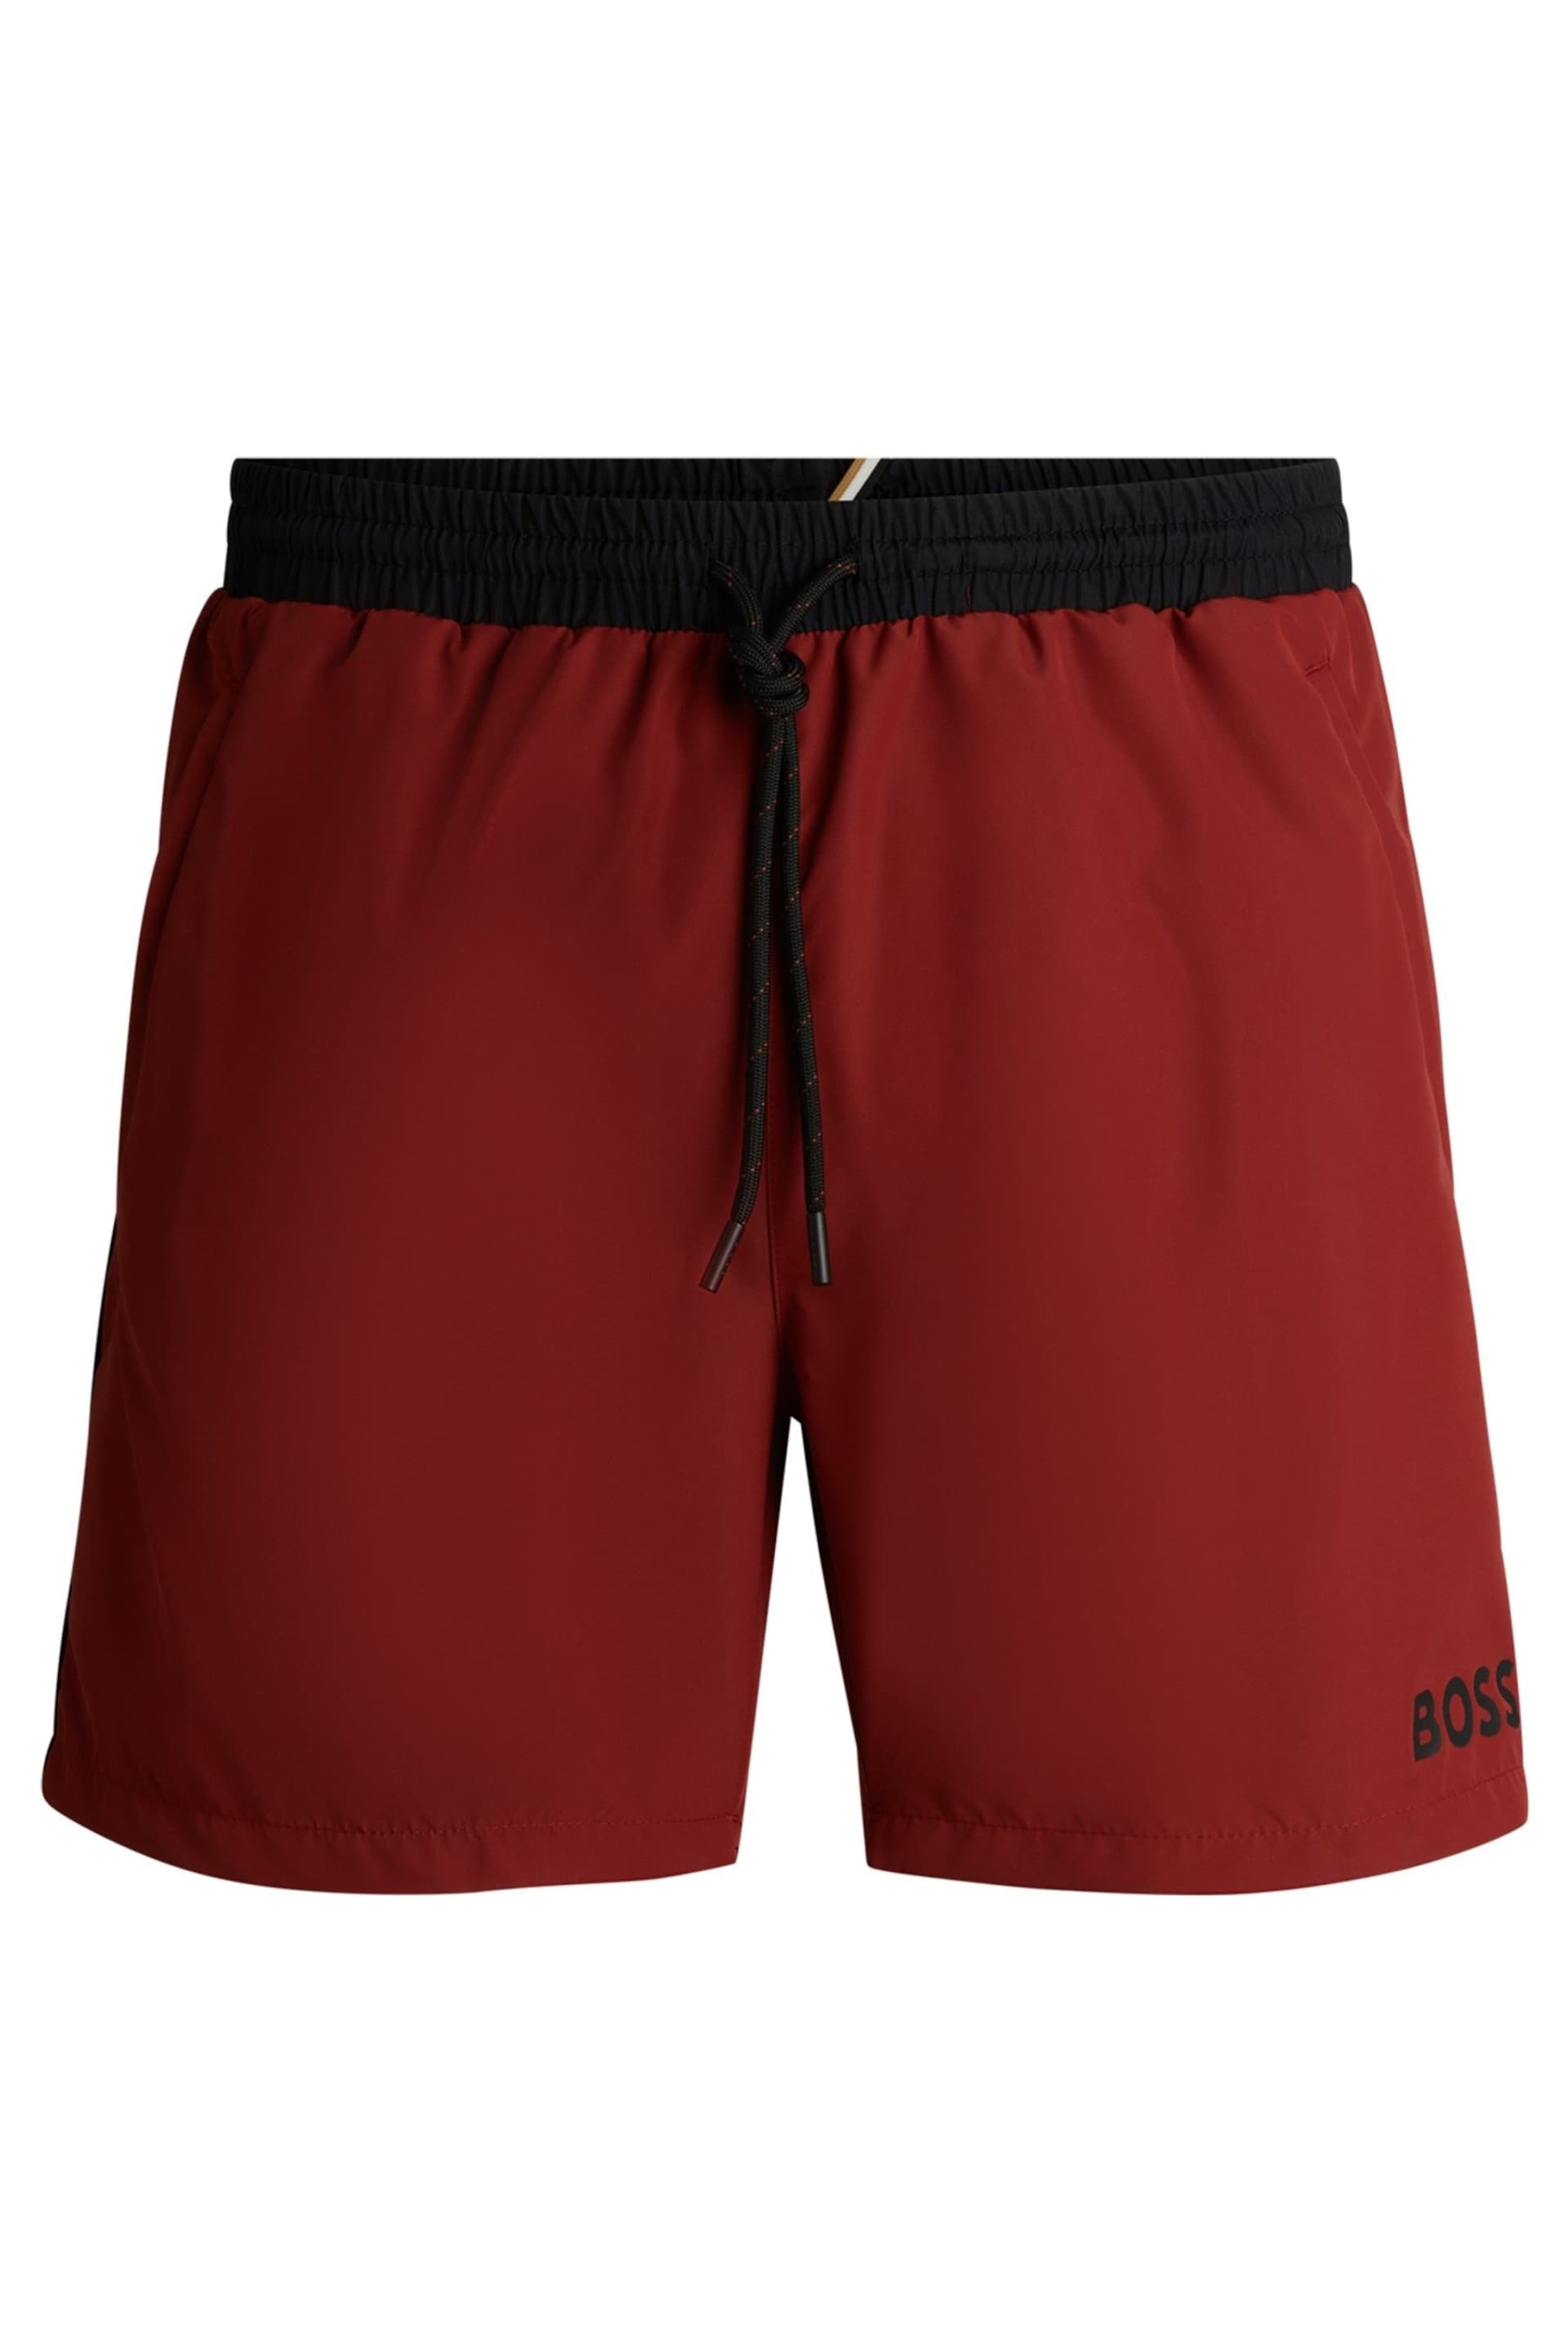 BOSS Brown Contrast-logo Swim Shorts In Recycled Material - Image 4 of 4